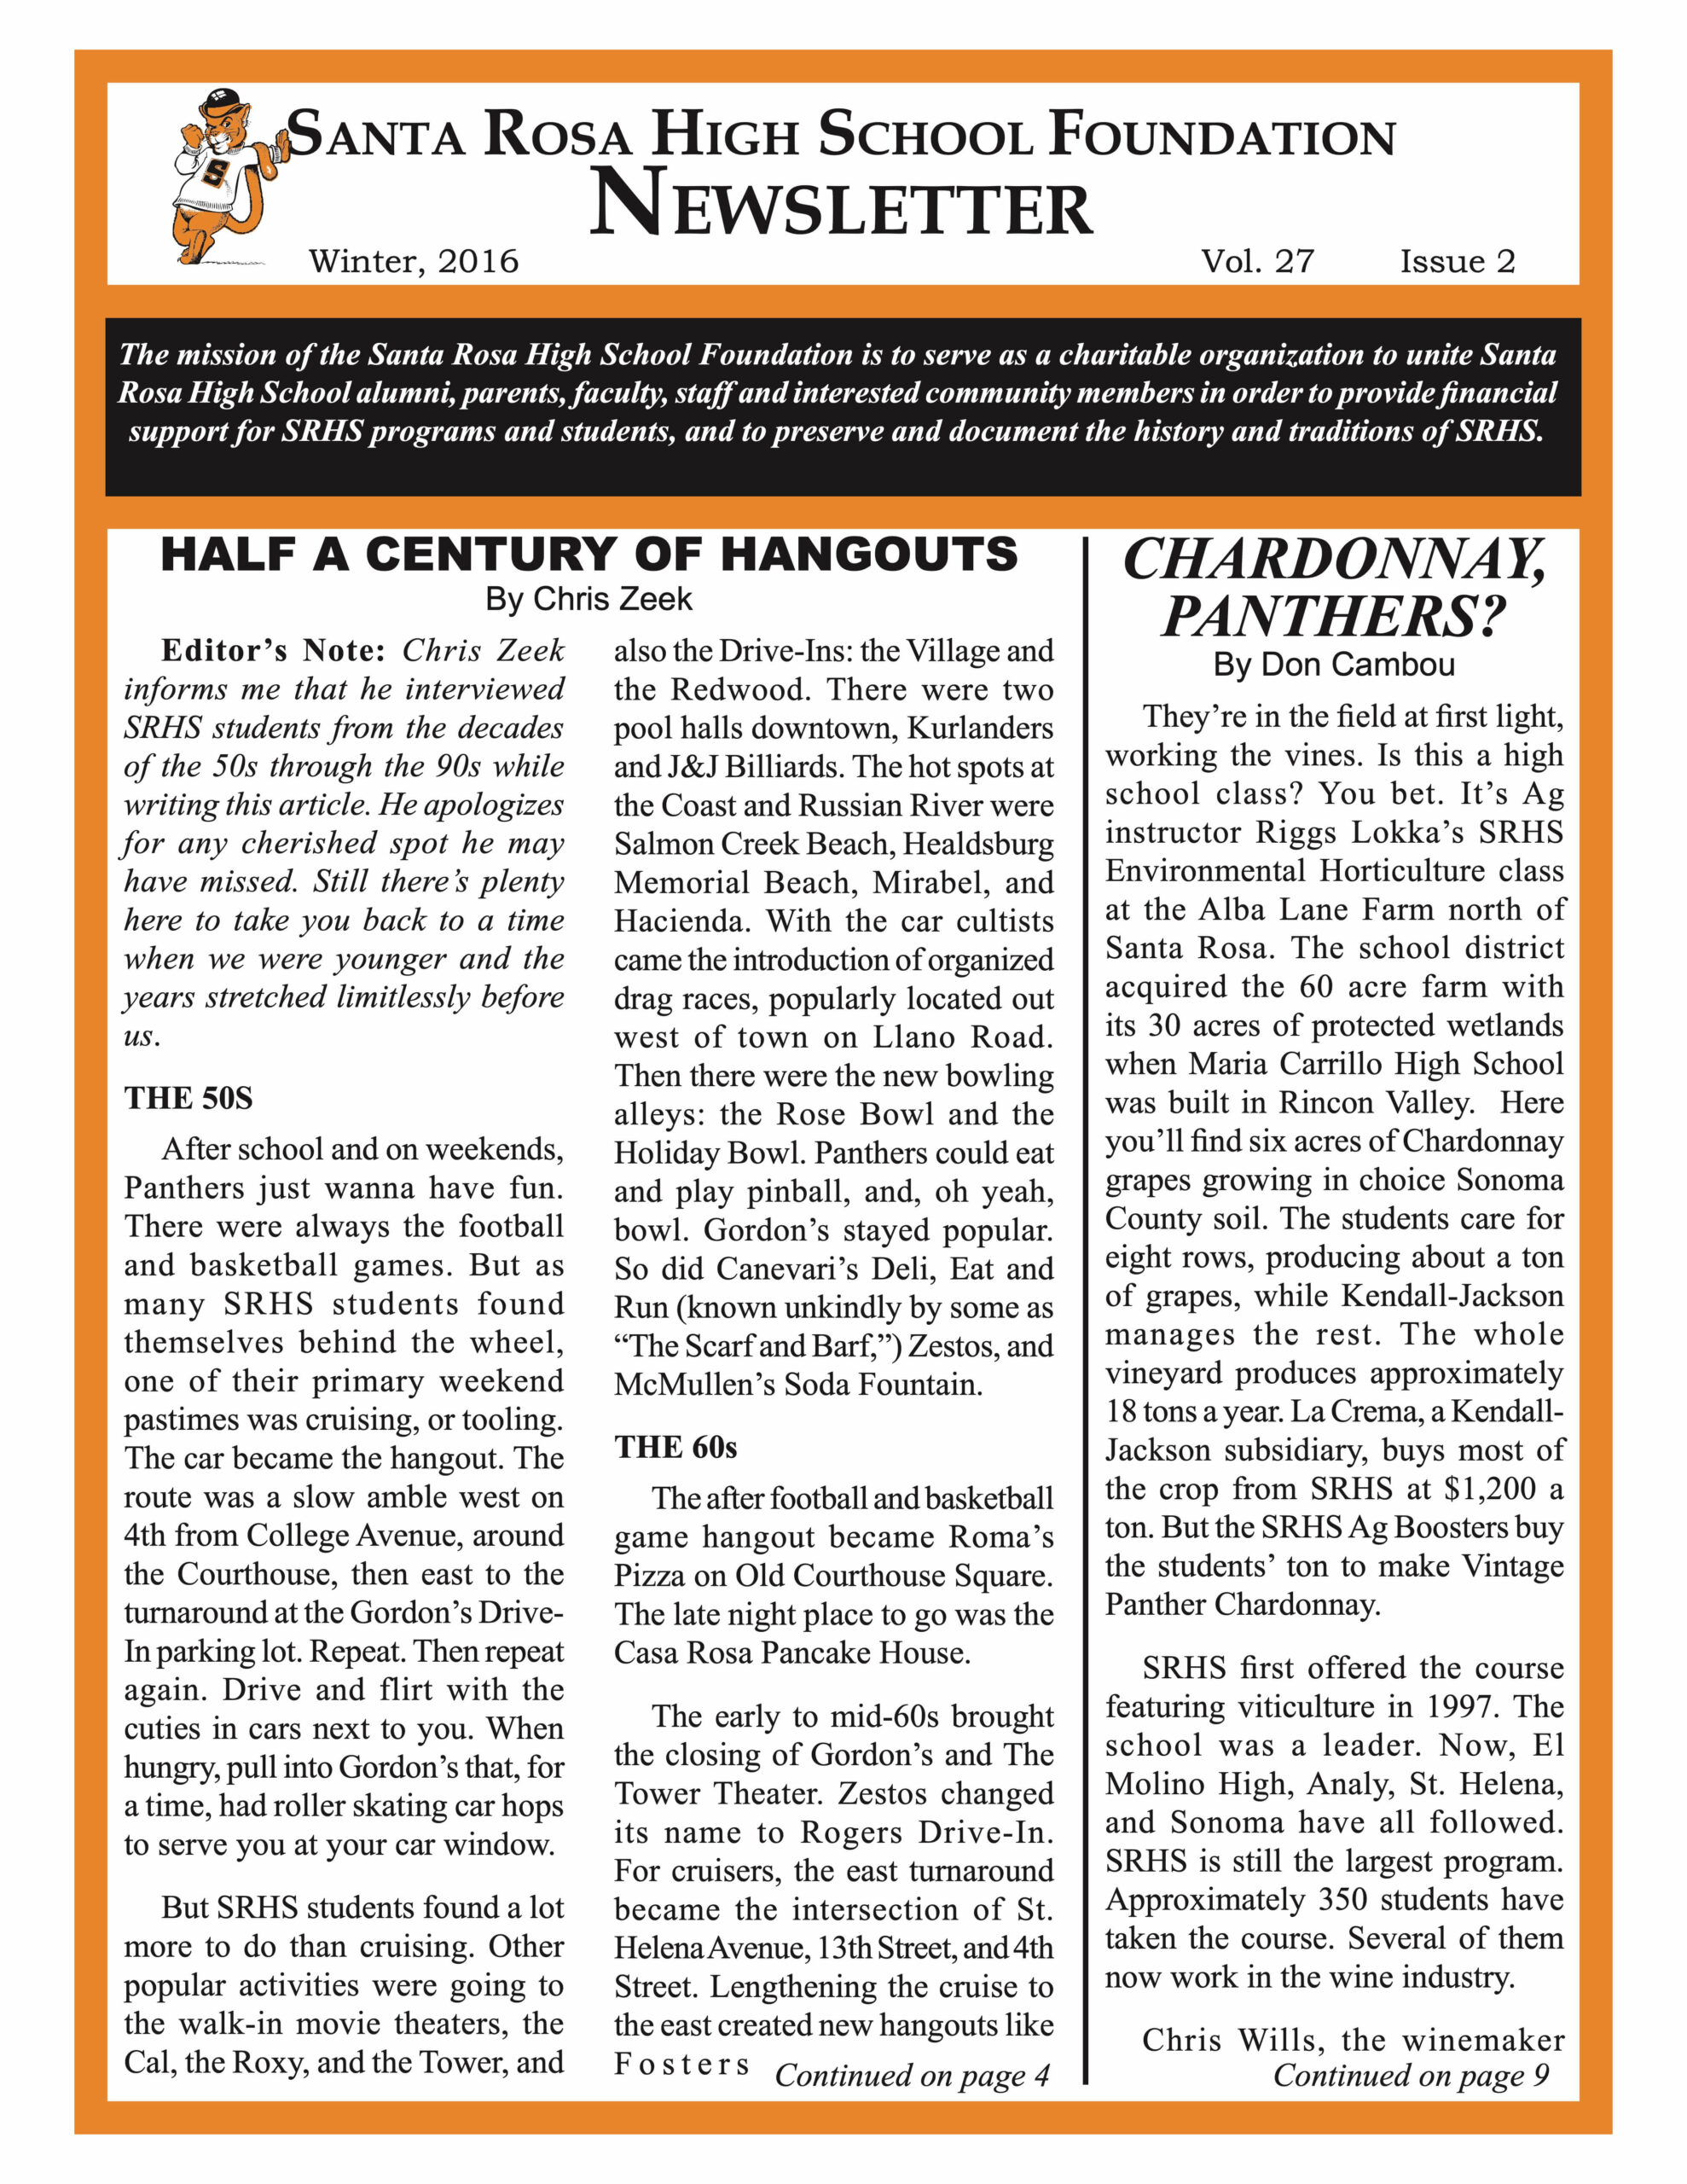 Newsletter front page - Winter 2016